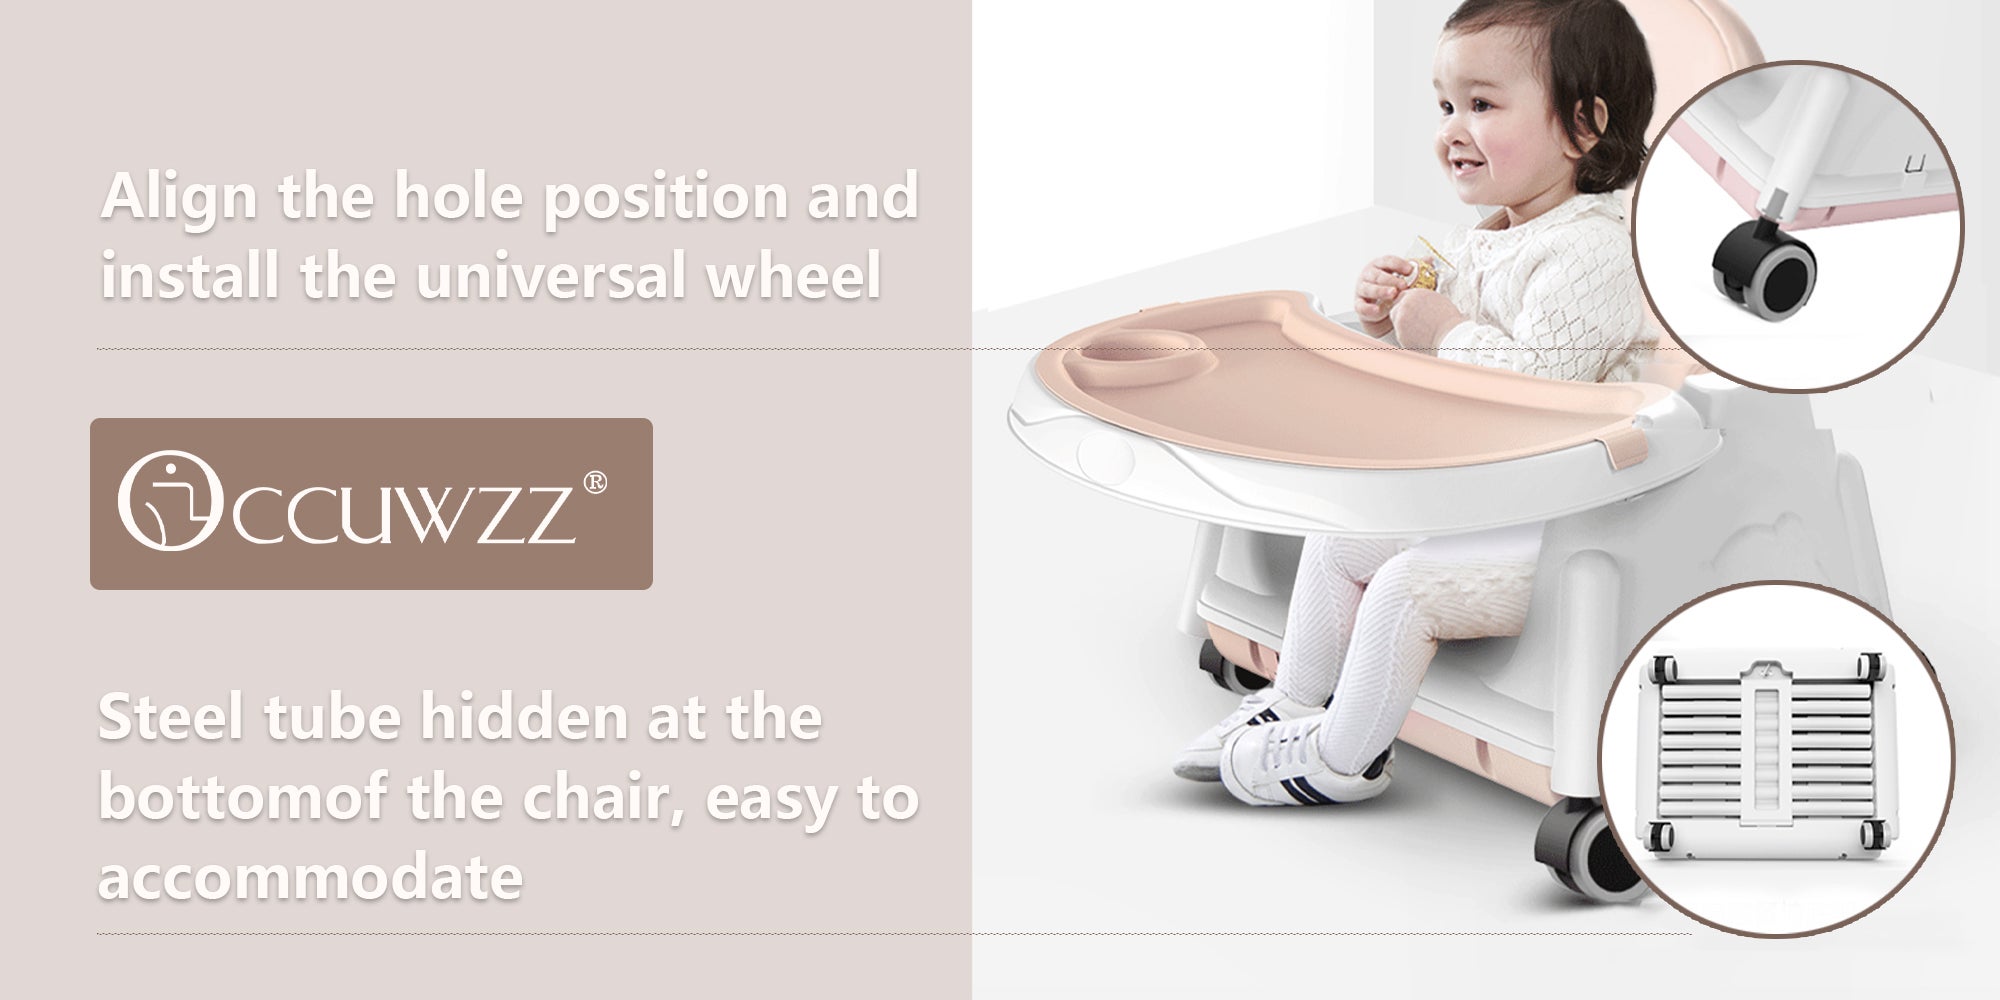 Baby High Chair Multifunctional Portable Foldable Safety Children Dining Chair